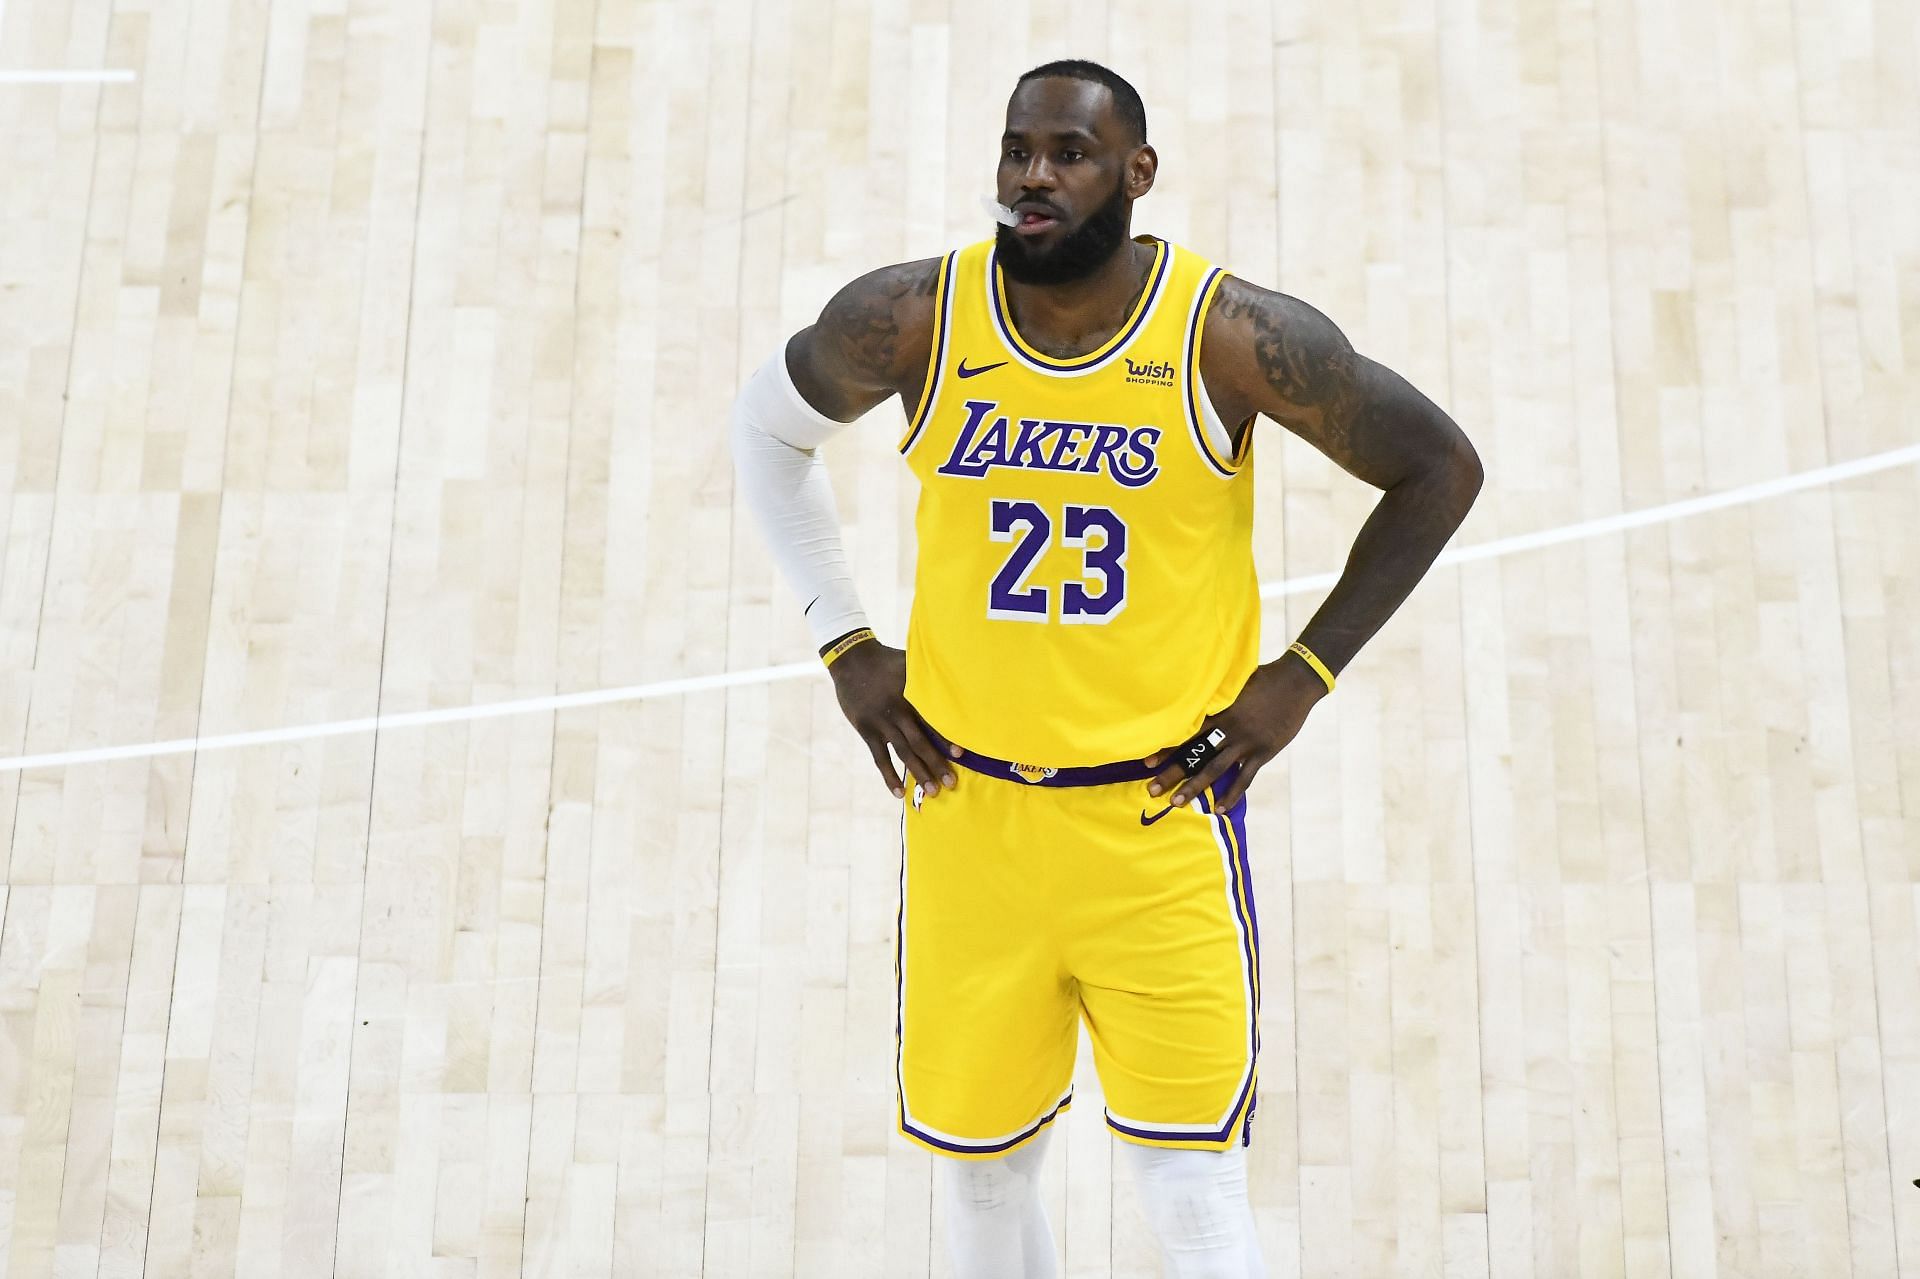 Los Angeles Lakers All-Star LeBron James